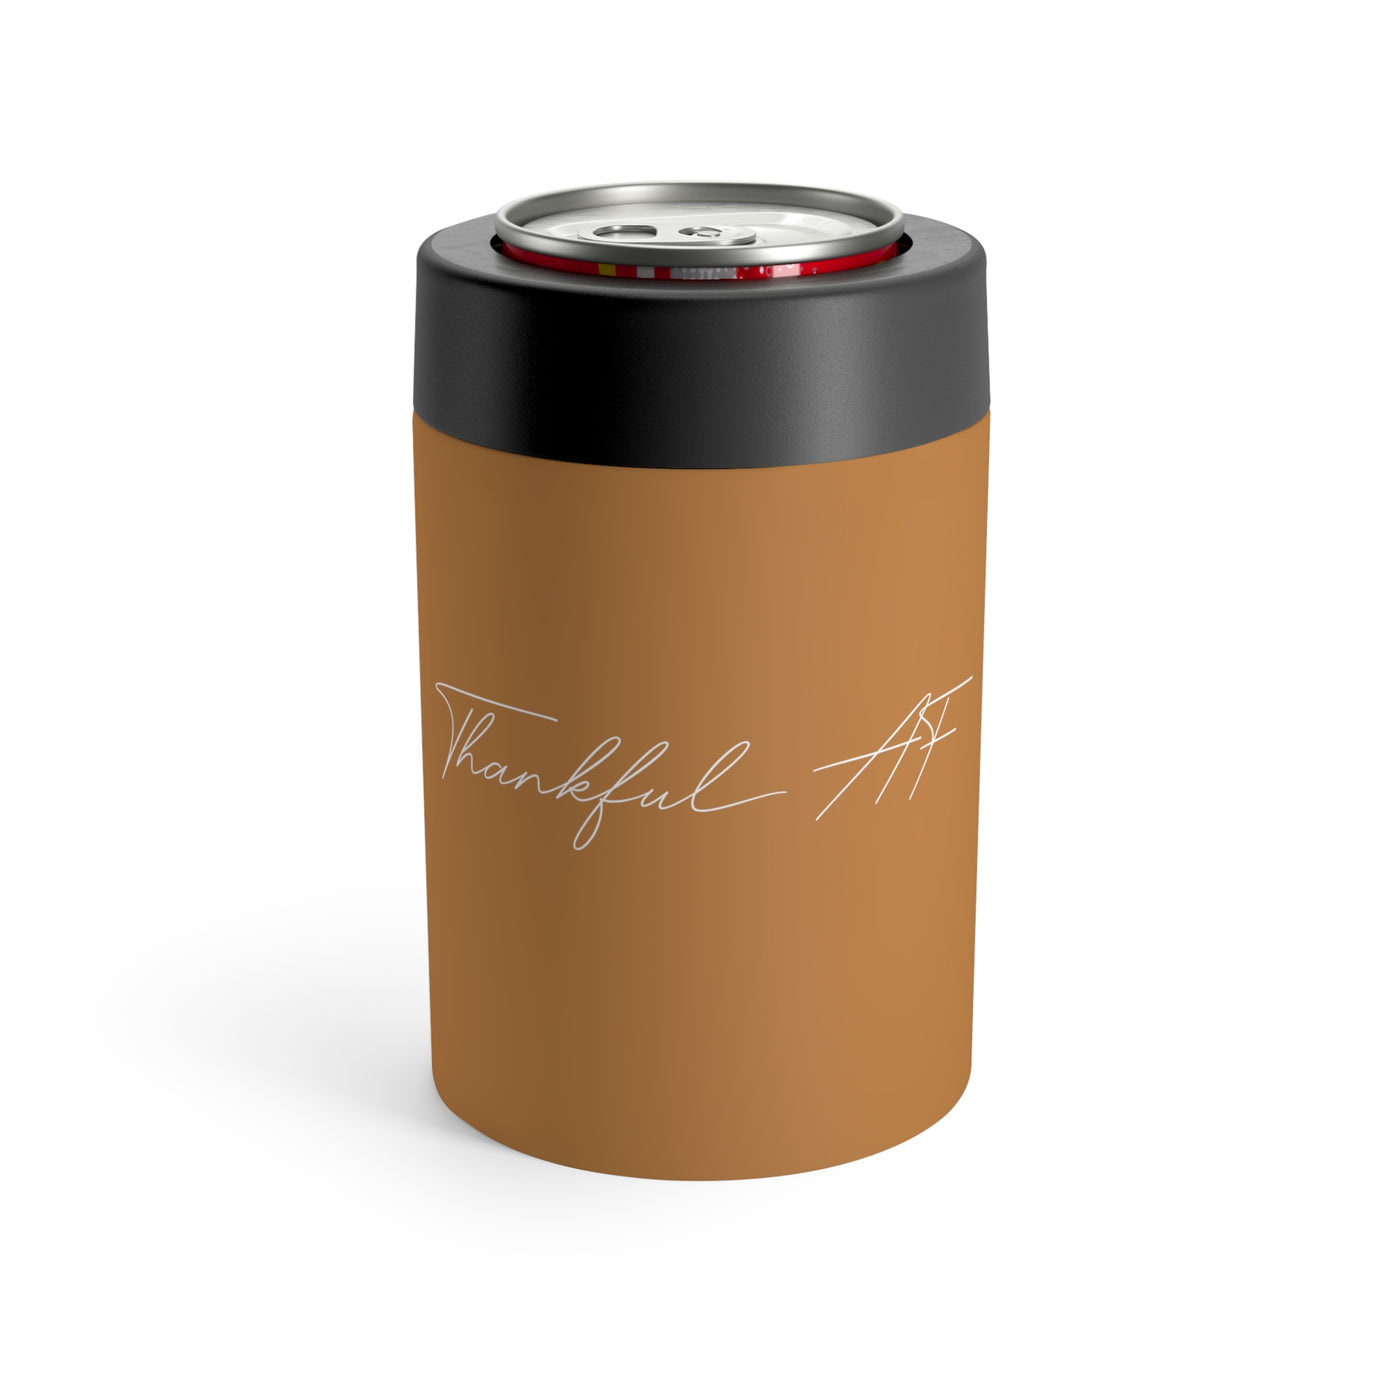 Thankful AF Stainless Steel Can Holder